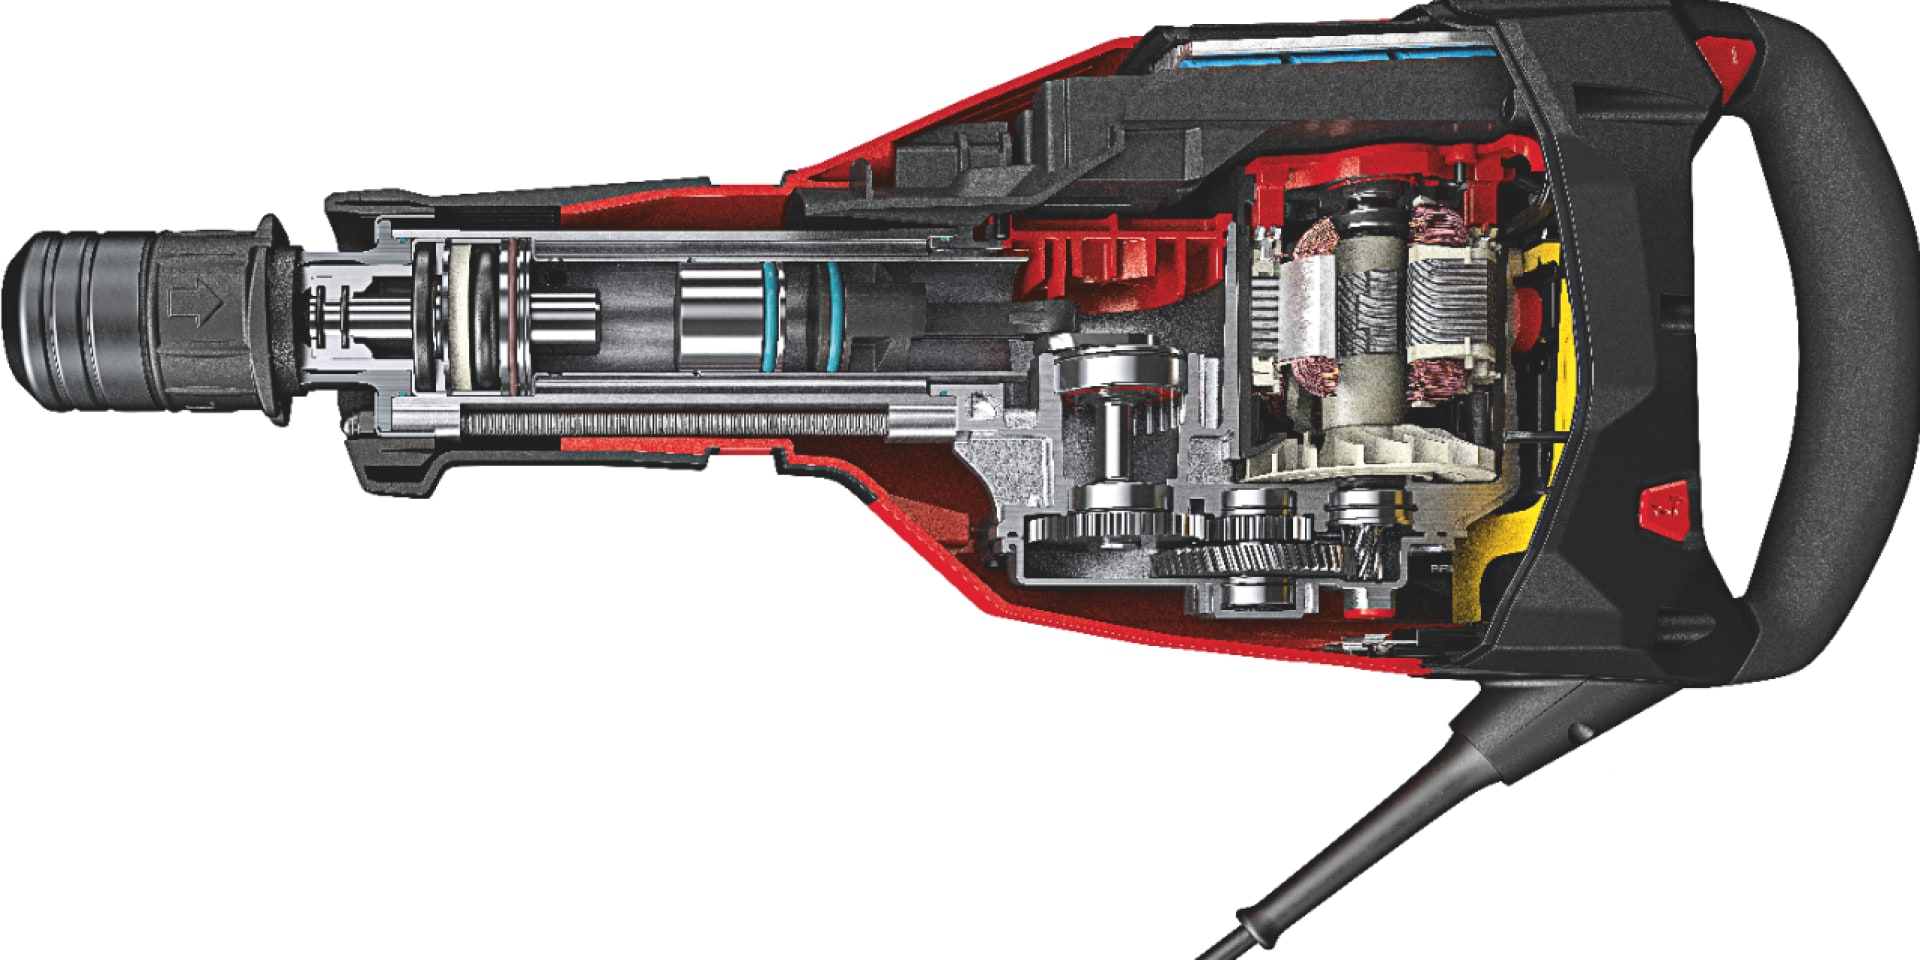 Cutaway to show the sub-chassis system inside the TE 1000-AVR